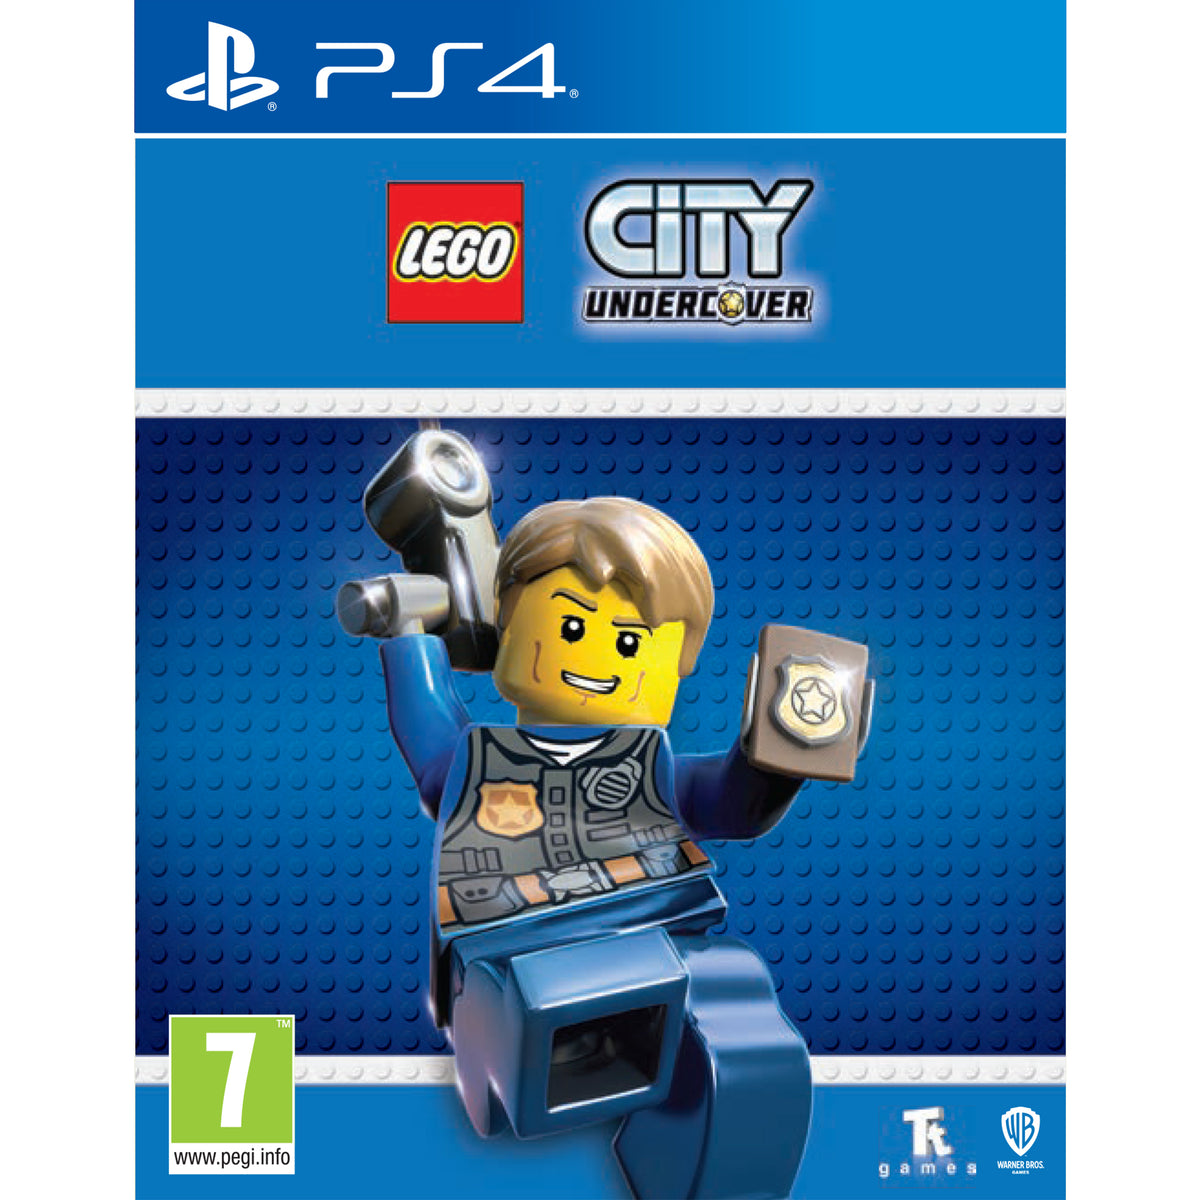 Lego City Undercover Runs Almost As Well On Switch As On PS4